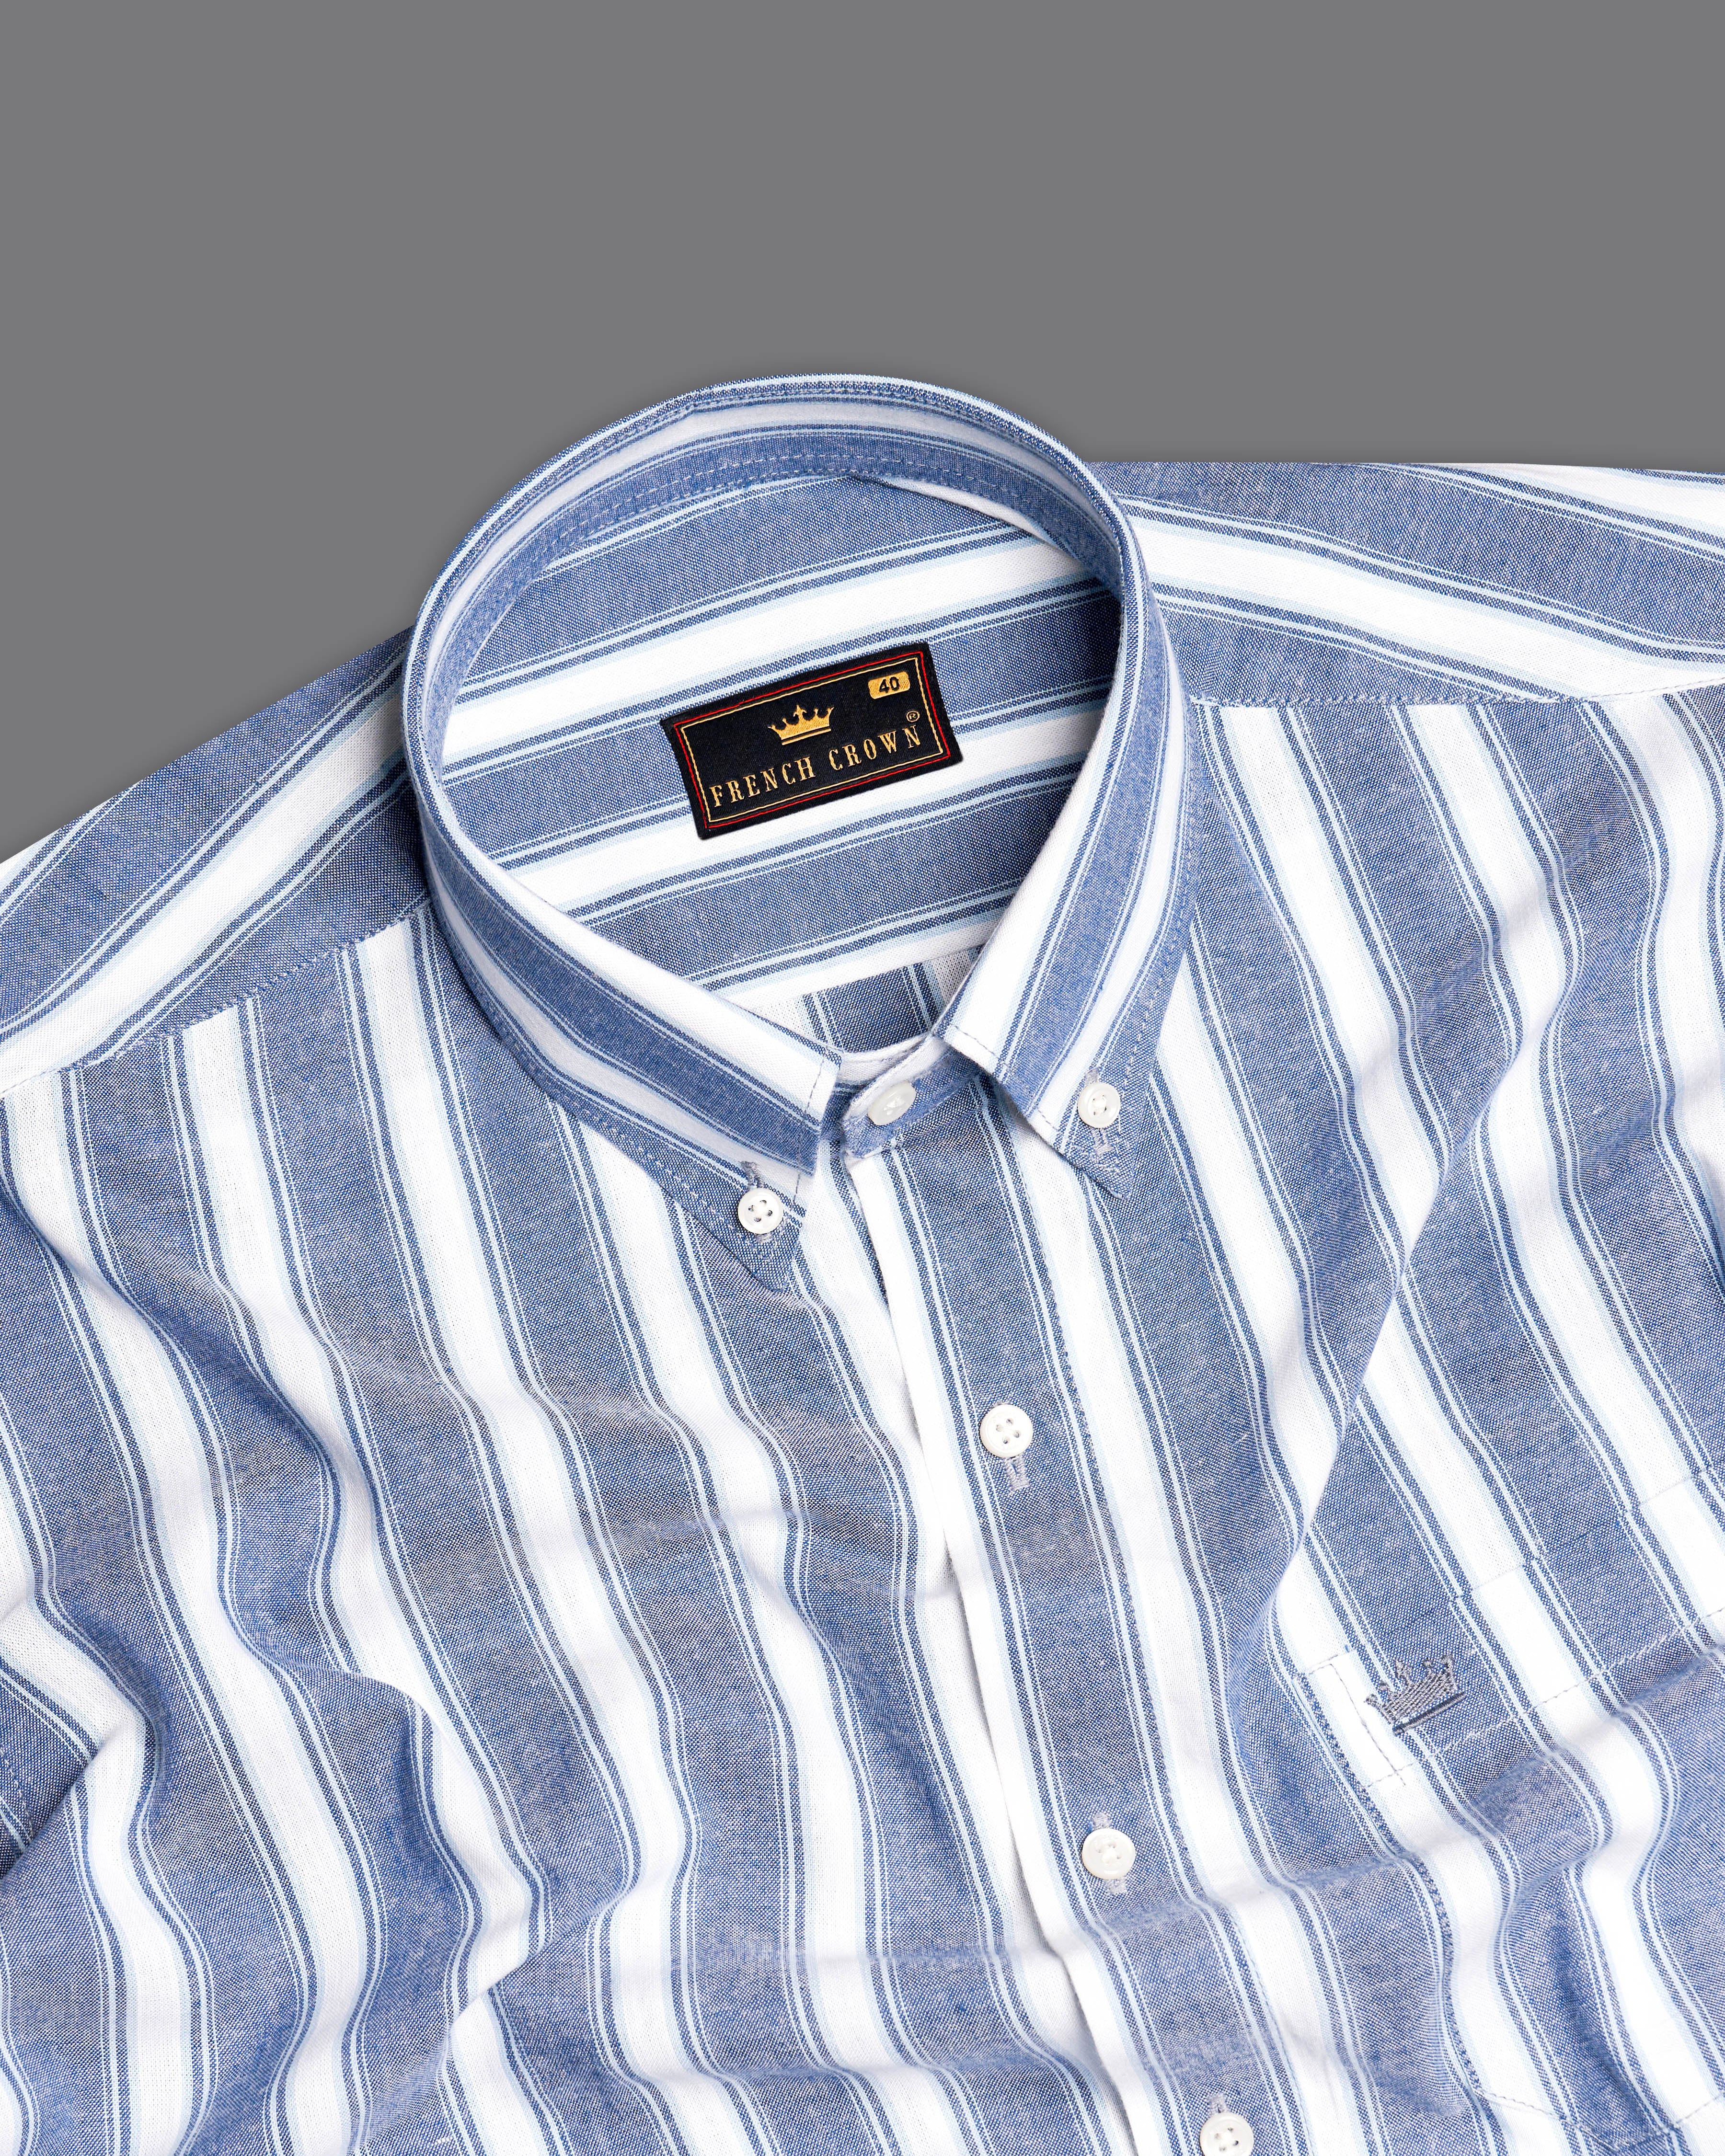 Regent Blue and White Striped Royal Oxford Shirt 9647-BD-38,9647-BD-H-38,9647-BD-39,9647-BD-H-39,9647-BD-40,9647-BD-H-40,9647-BD-42,9647-BD-H-42,9647-BD-44,9647-BD-H-44,9647-BD-46,9647-BD-H-46,9647-BD-48,9647-BD-H-48,9647-BD-50,9647-BD-H-50,9647-BD-52,9647-BD-H-52